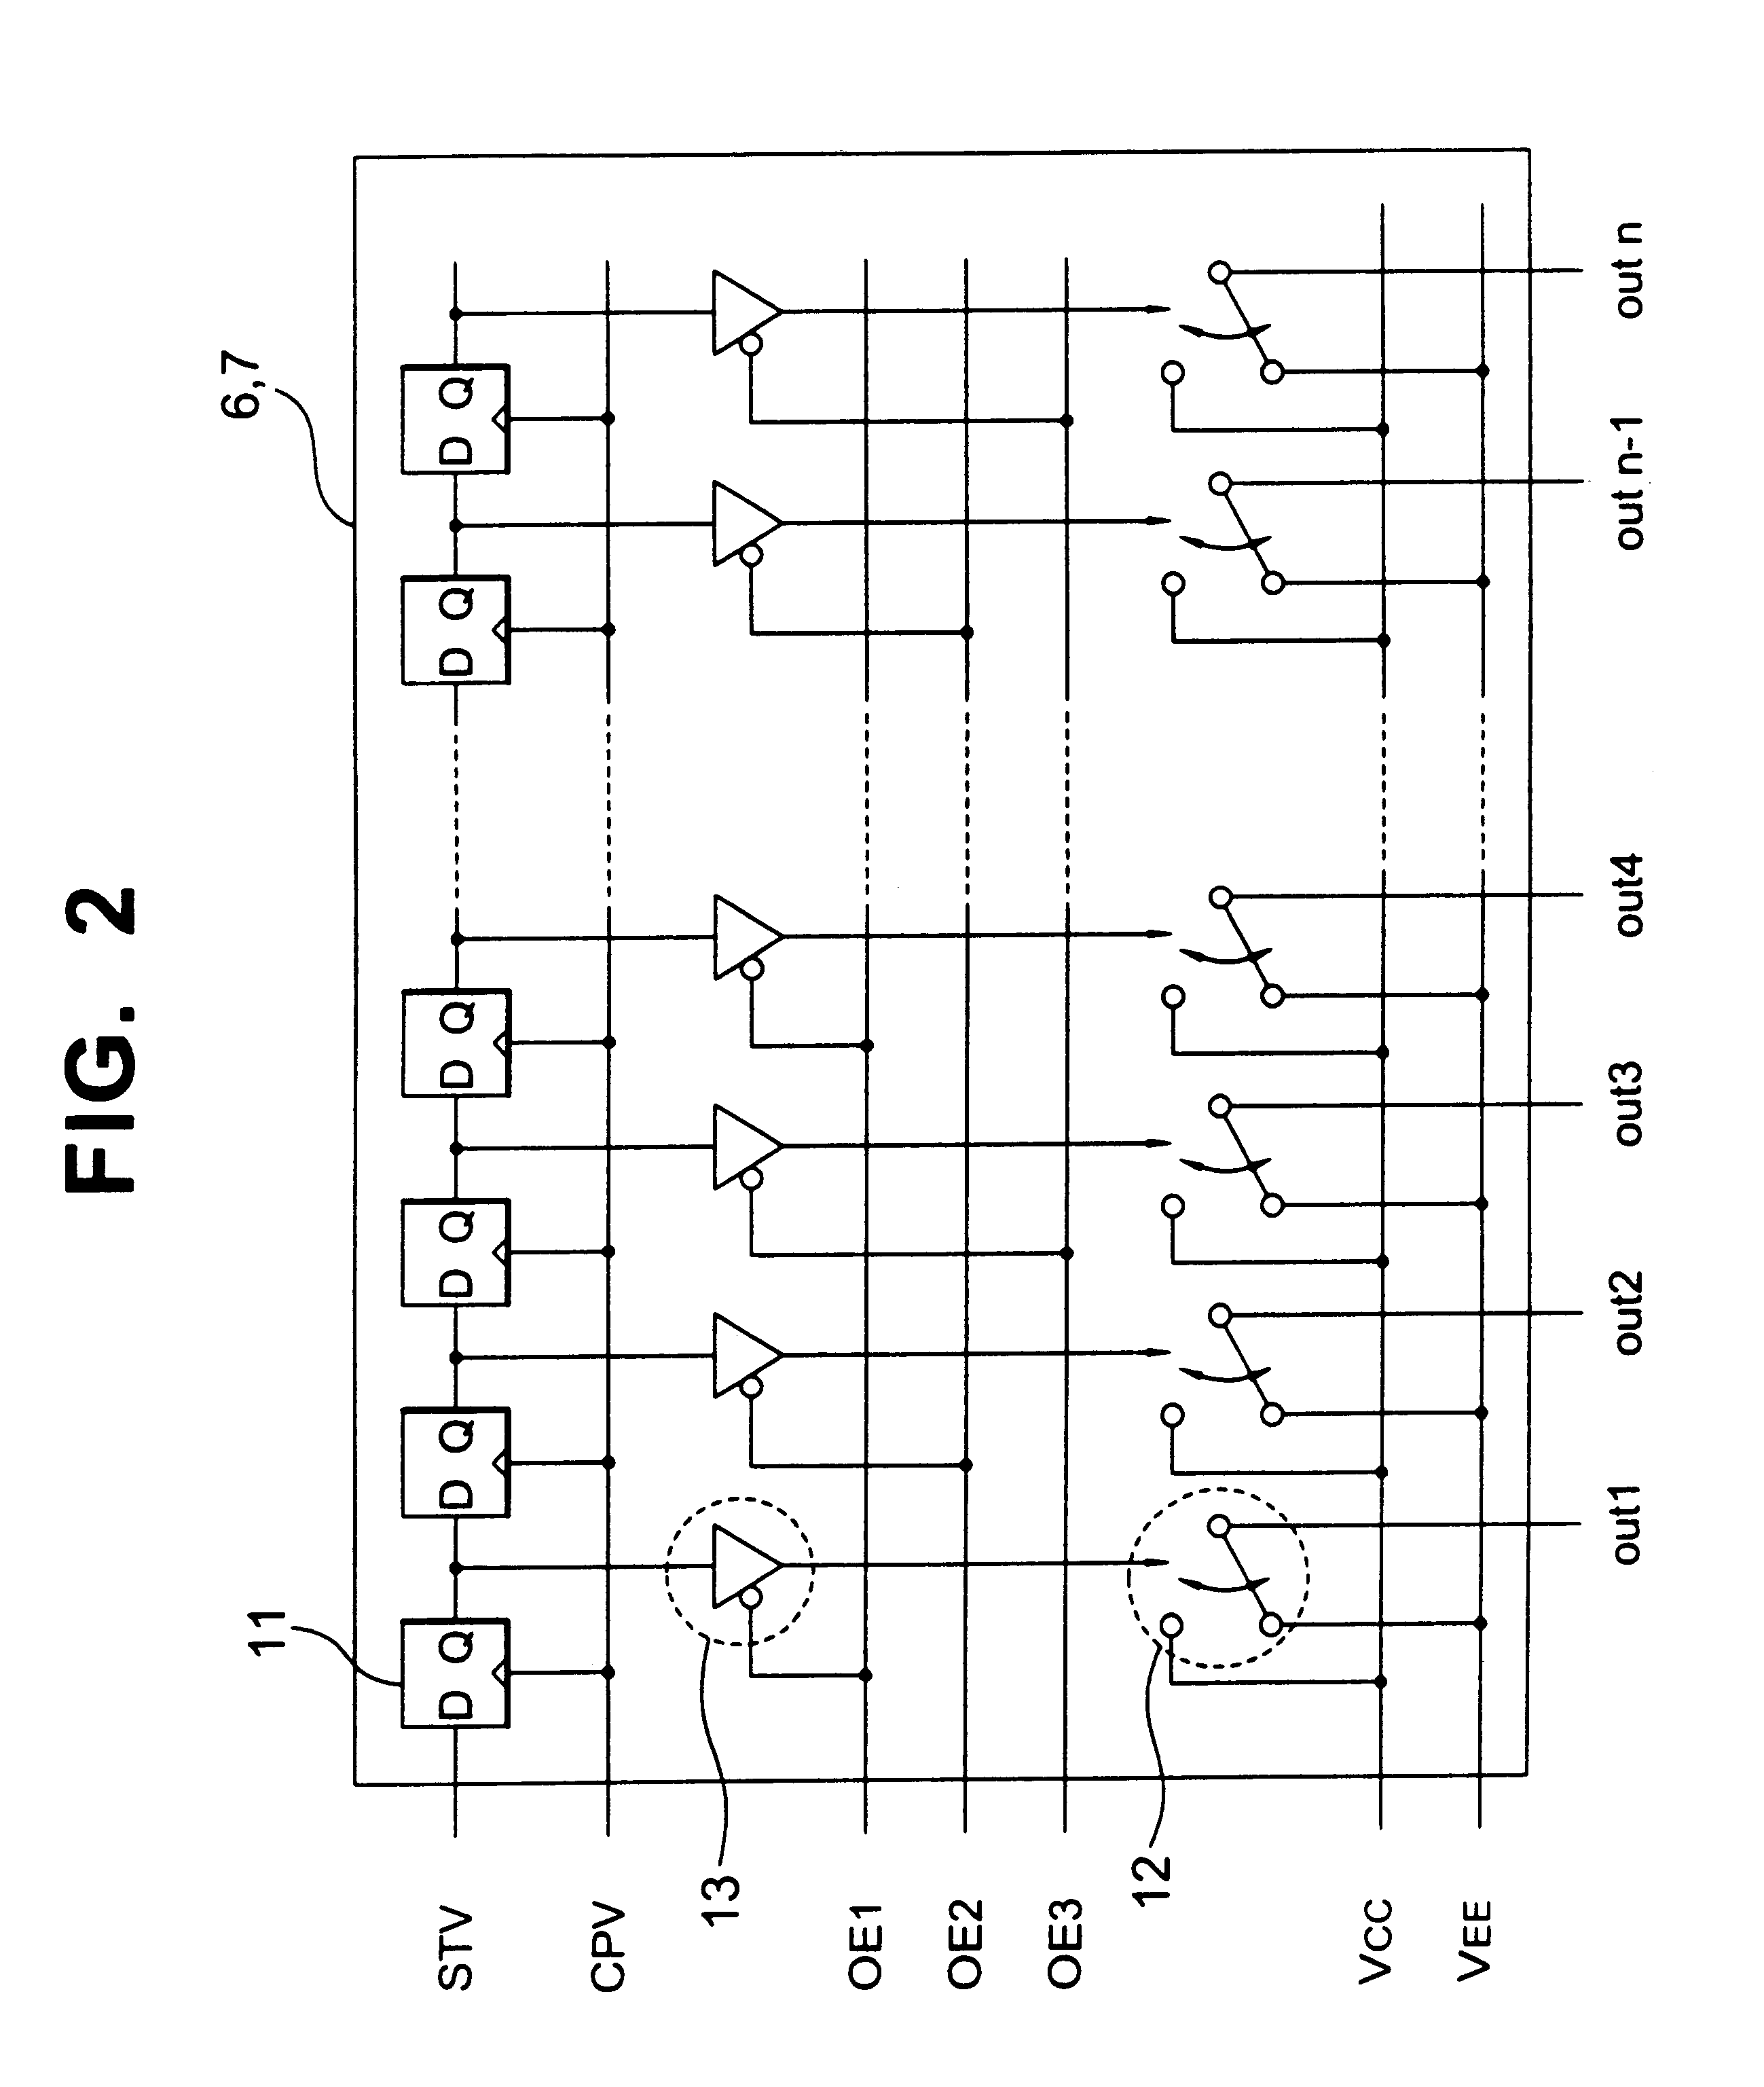 Image detecting device and an X-ray imaging system